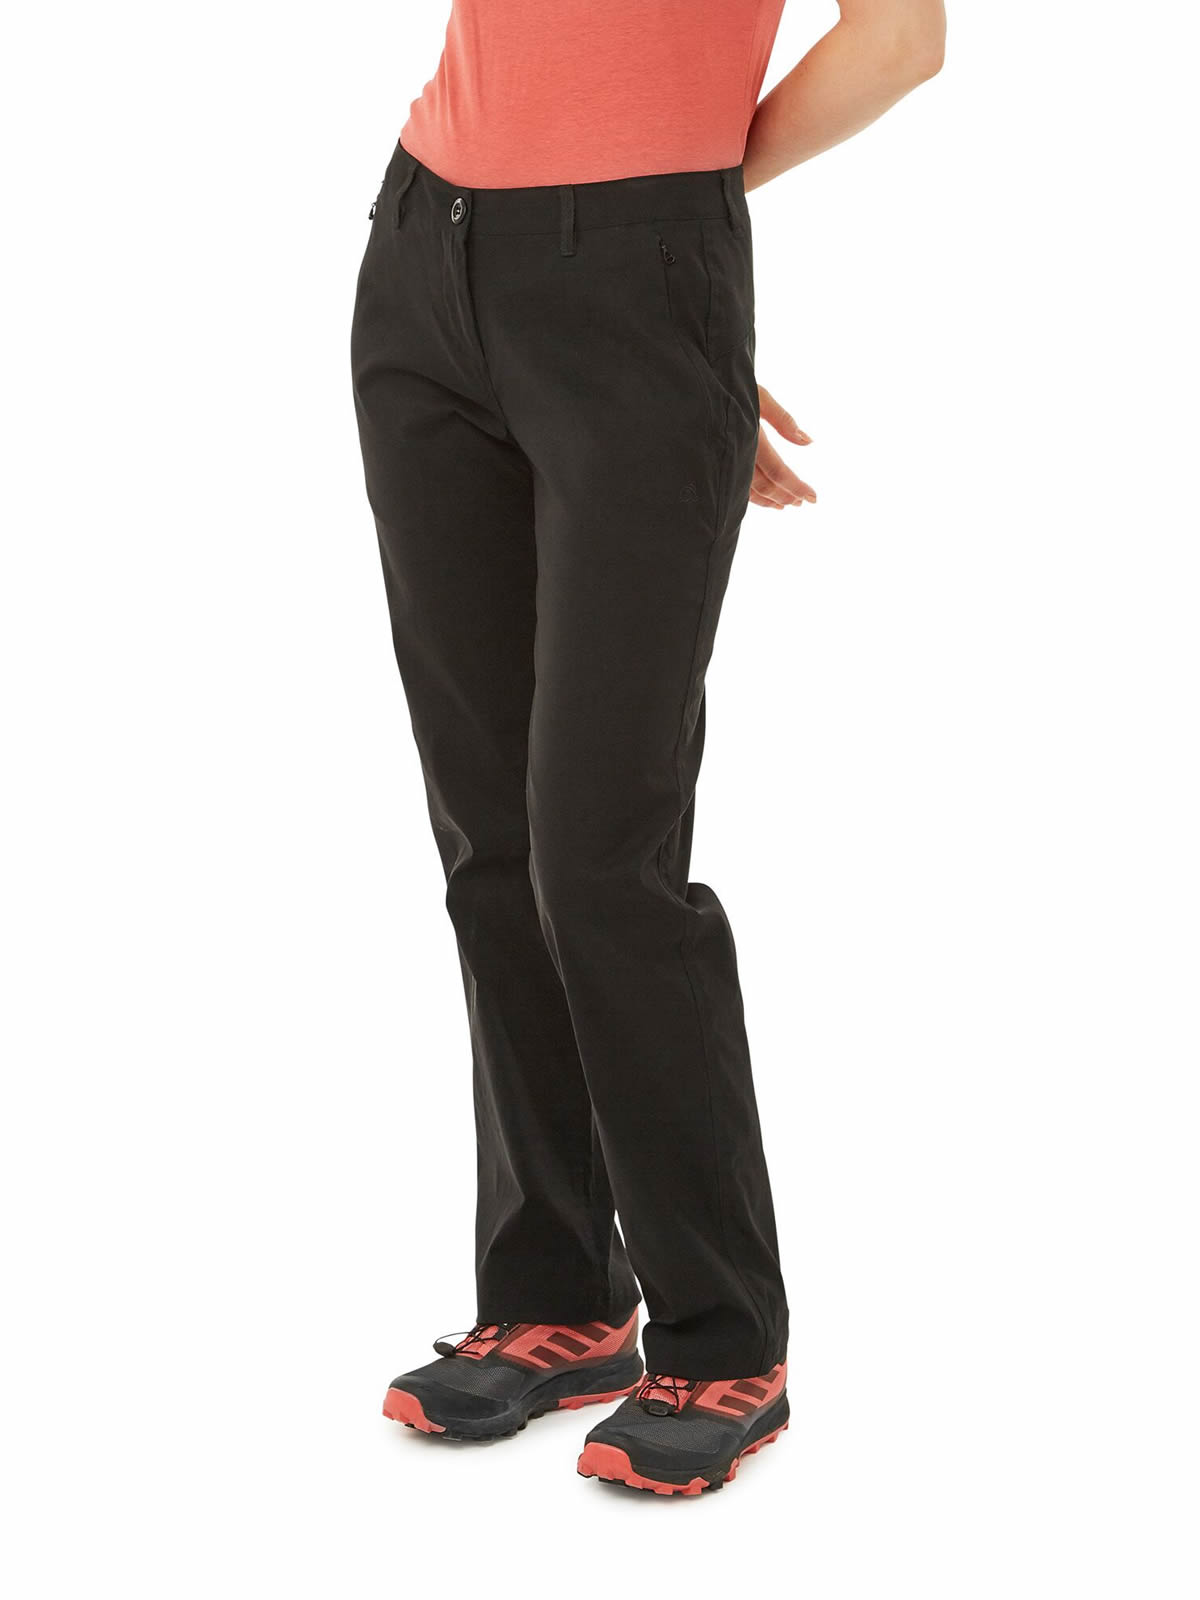 craghoppers womens kiwi pro stretch trousers